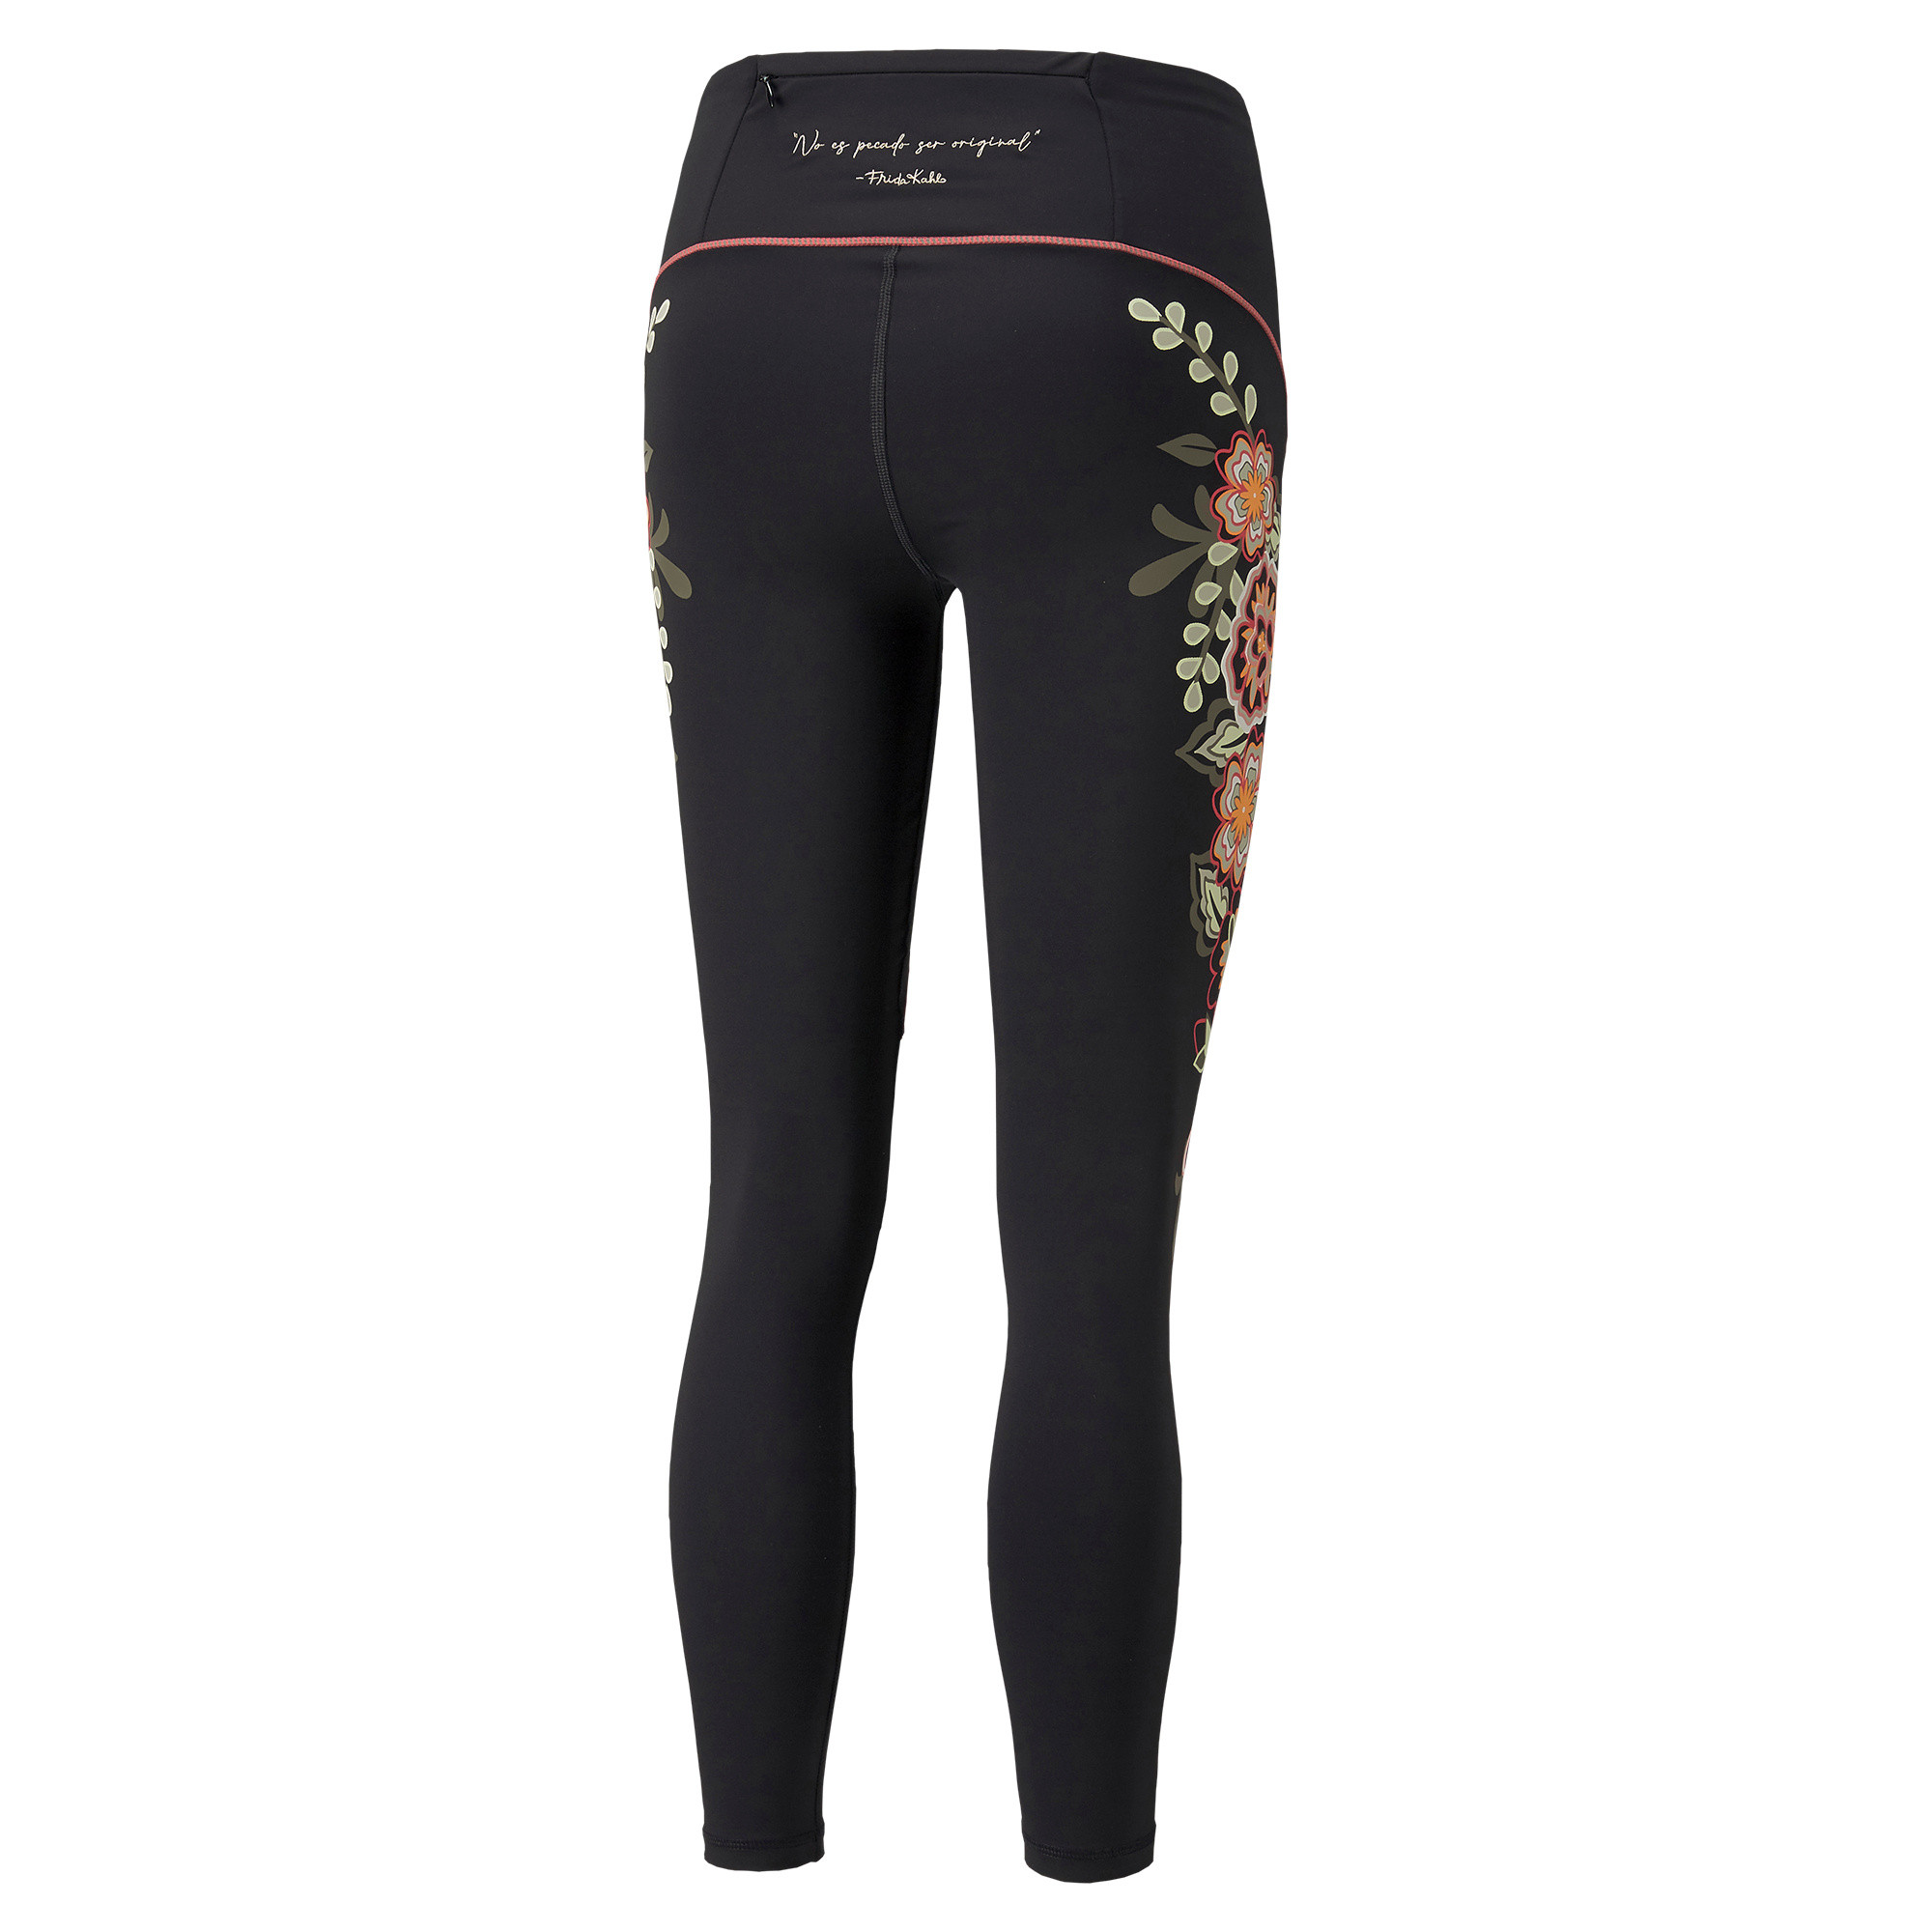 Training Leggings in  drycell, Black, large image number 1